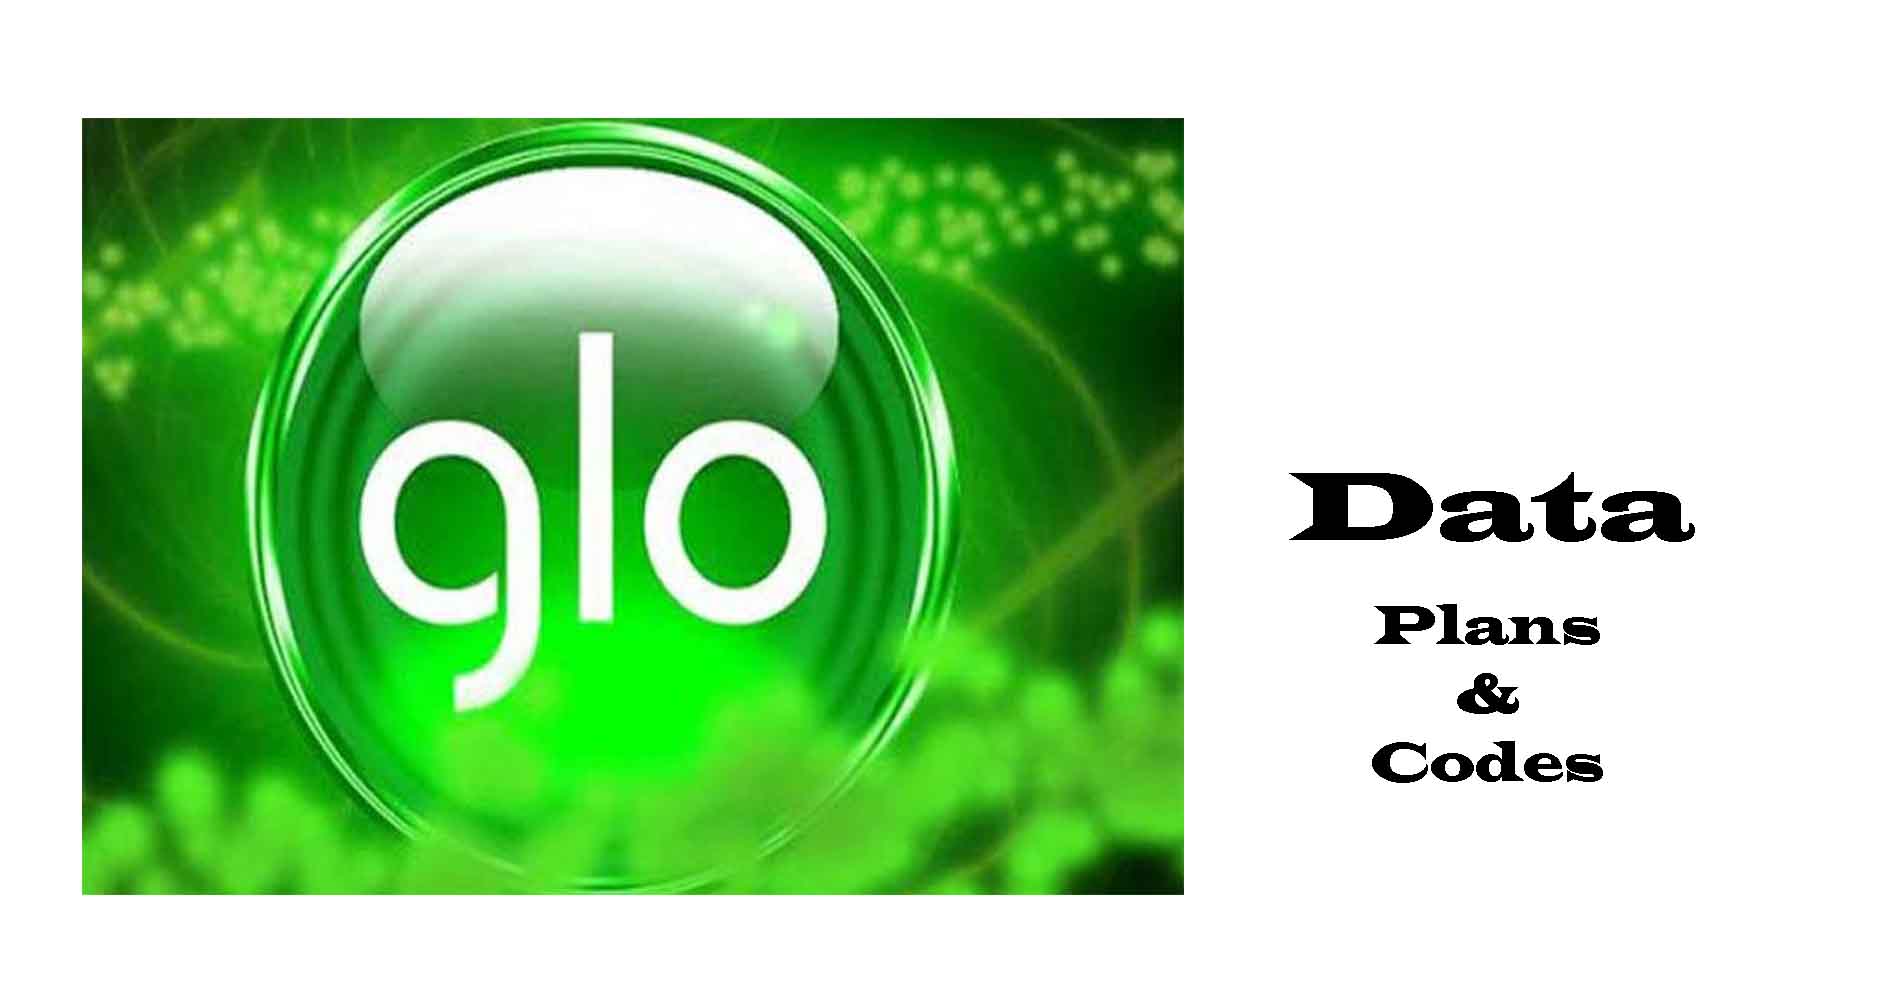 Glo data plans & Subscription codes